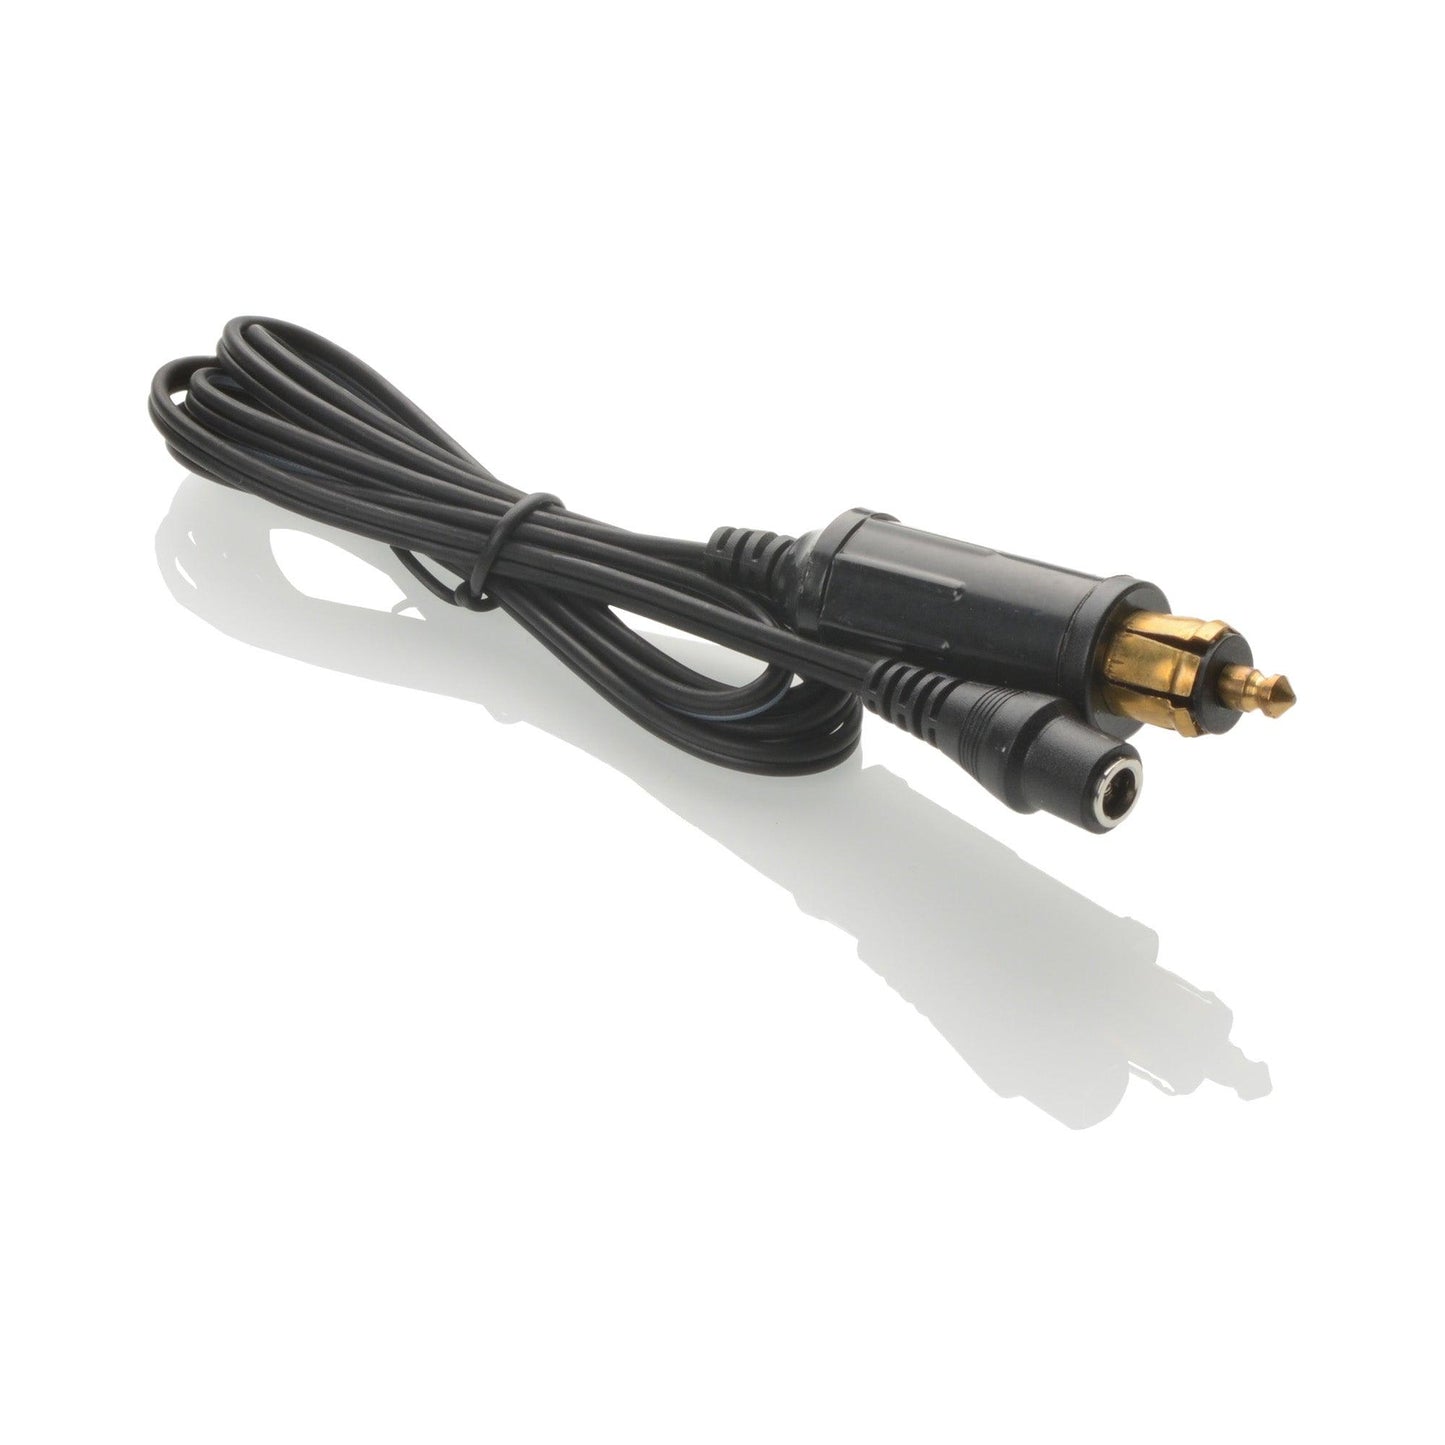 Macna Heated Clothing Hella Port Connection Cable 120cms - Browse our range of Gloves: Accessories - getgearedshop 